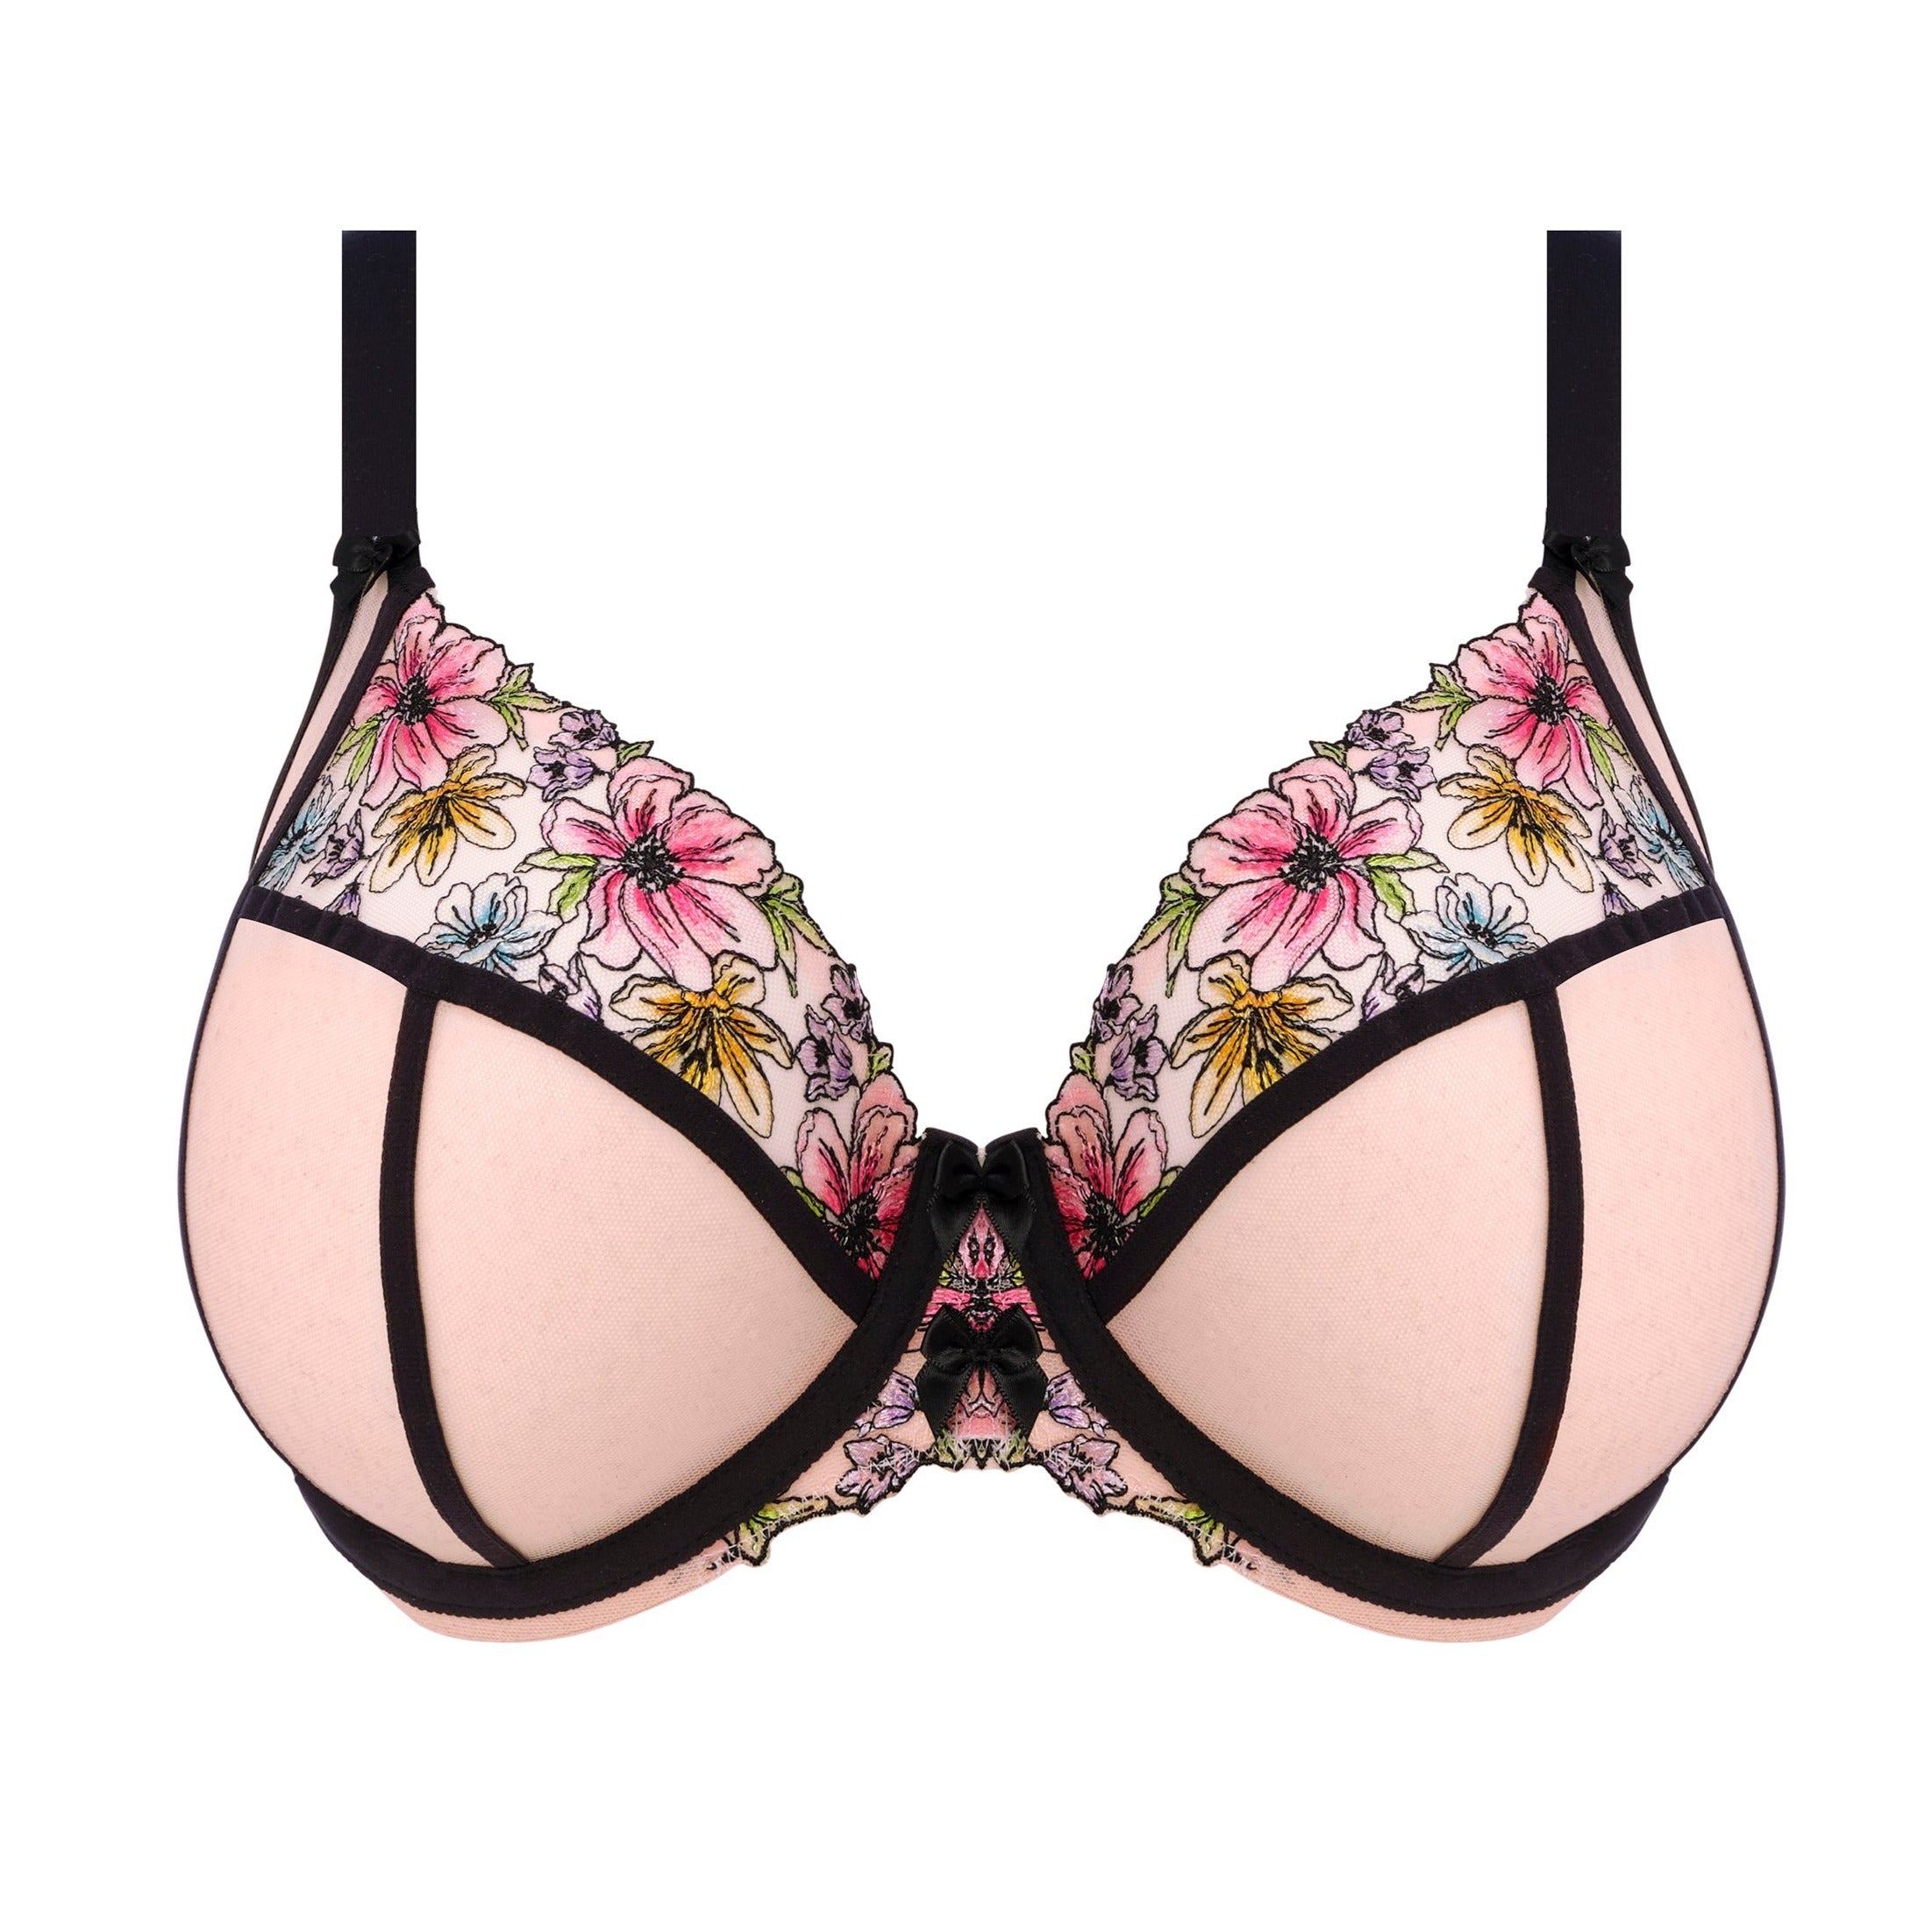 M&S Floral Tattoo Embroidered Balcony Bra for Women